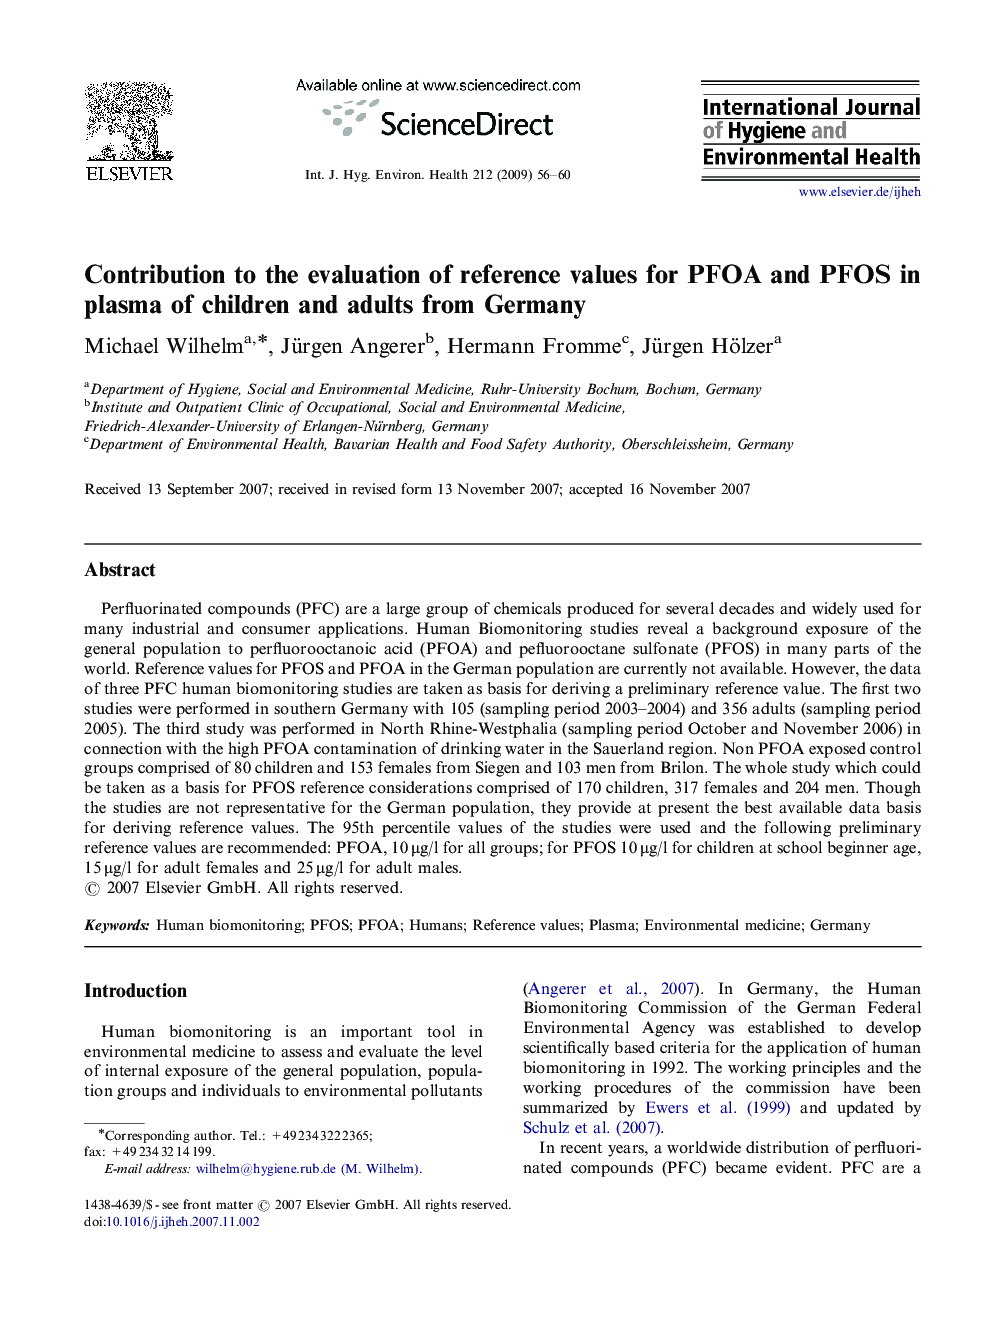 Contribution to the evaluation of reference values for PFOA and PFOS in plasma of children and adults from Germany